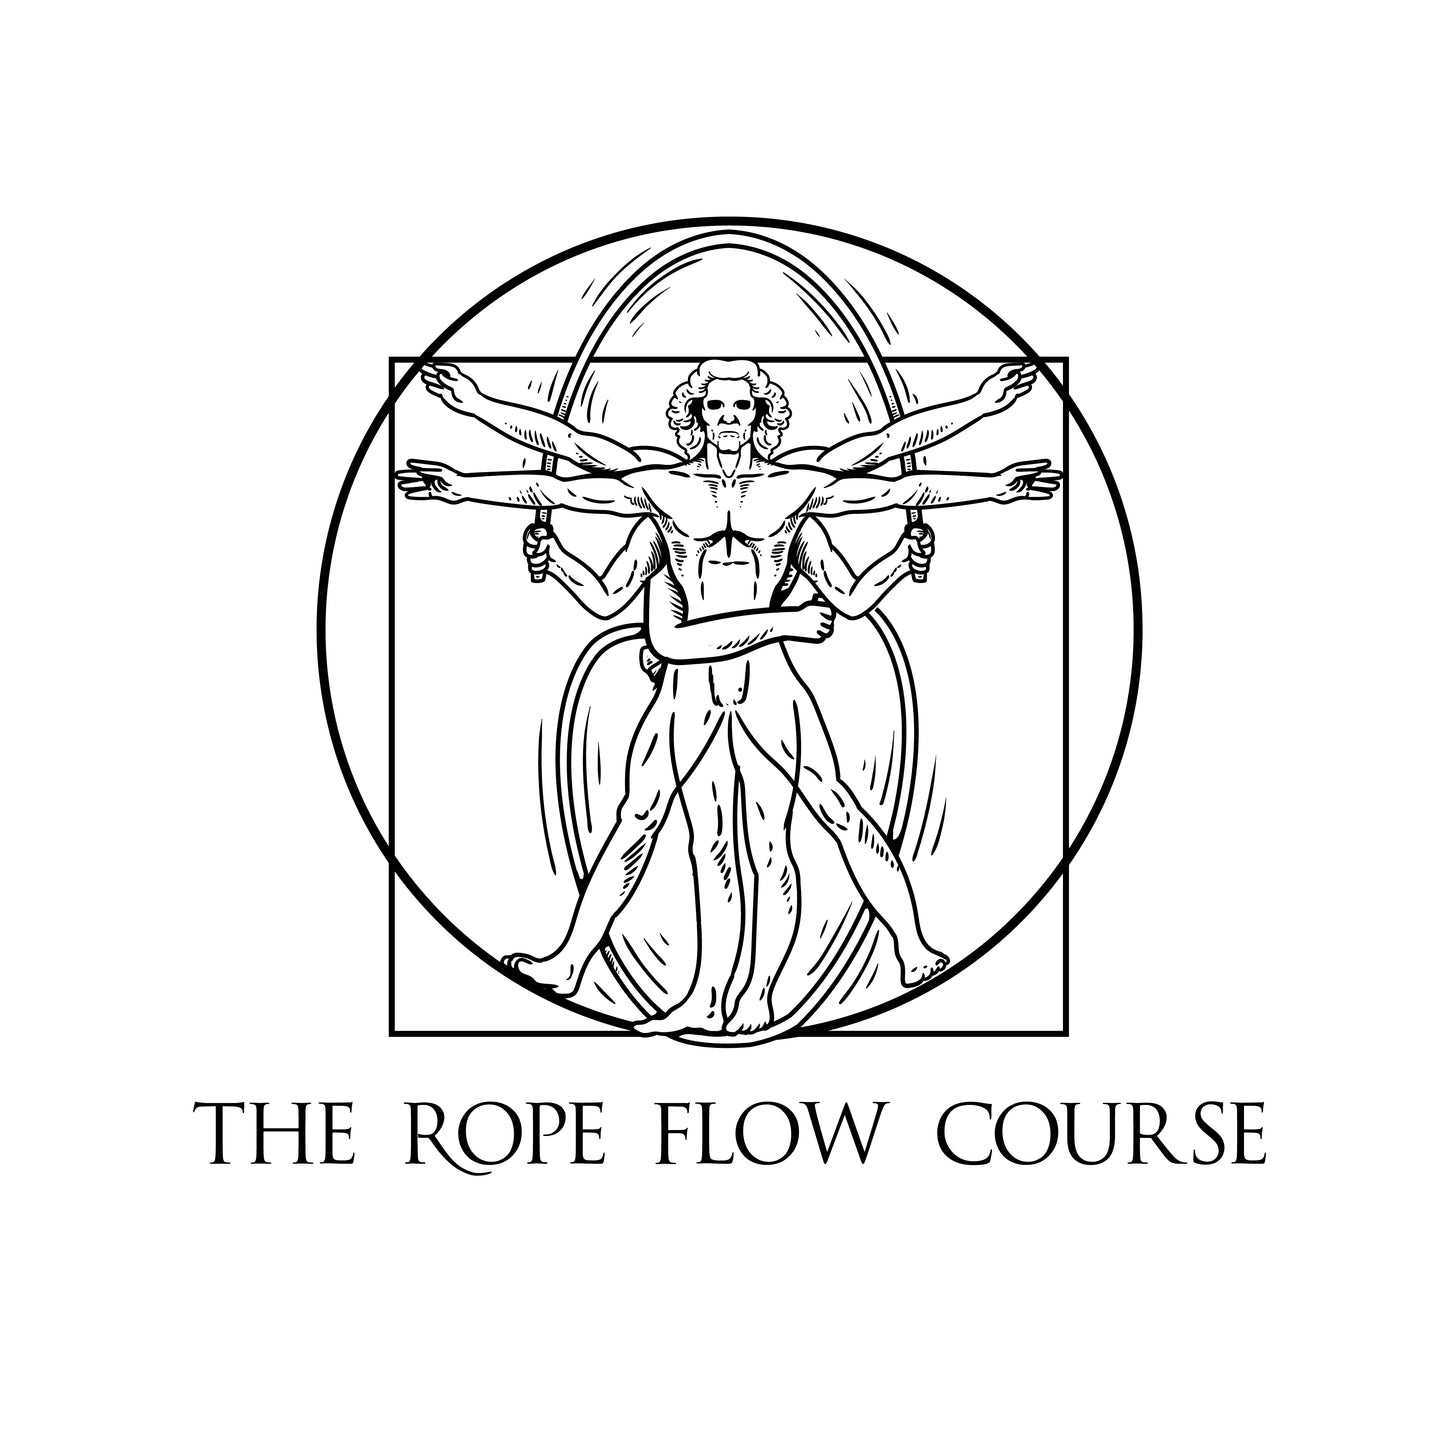 The Rope Flow Course